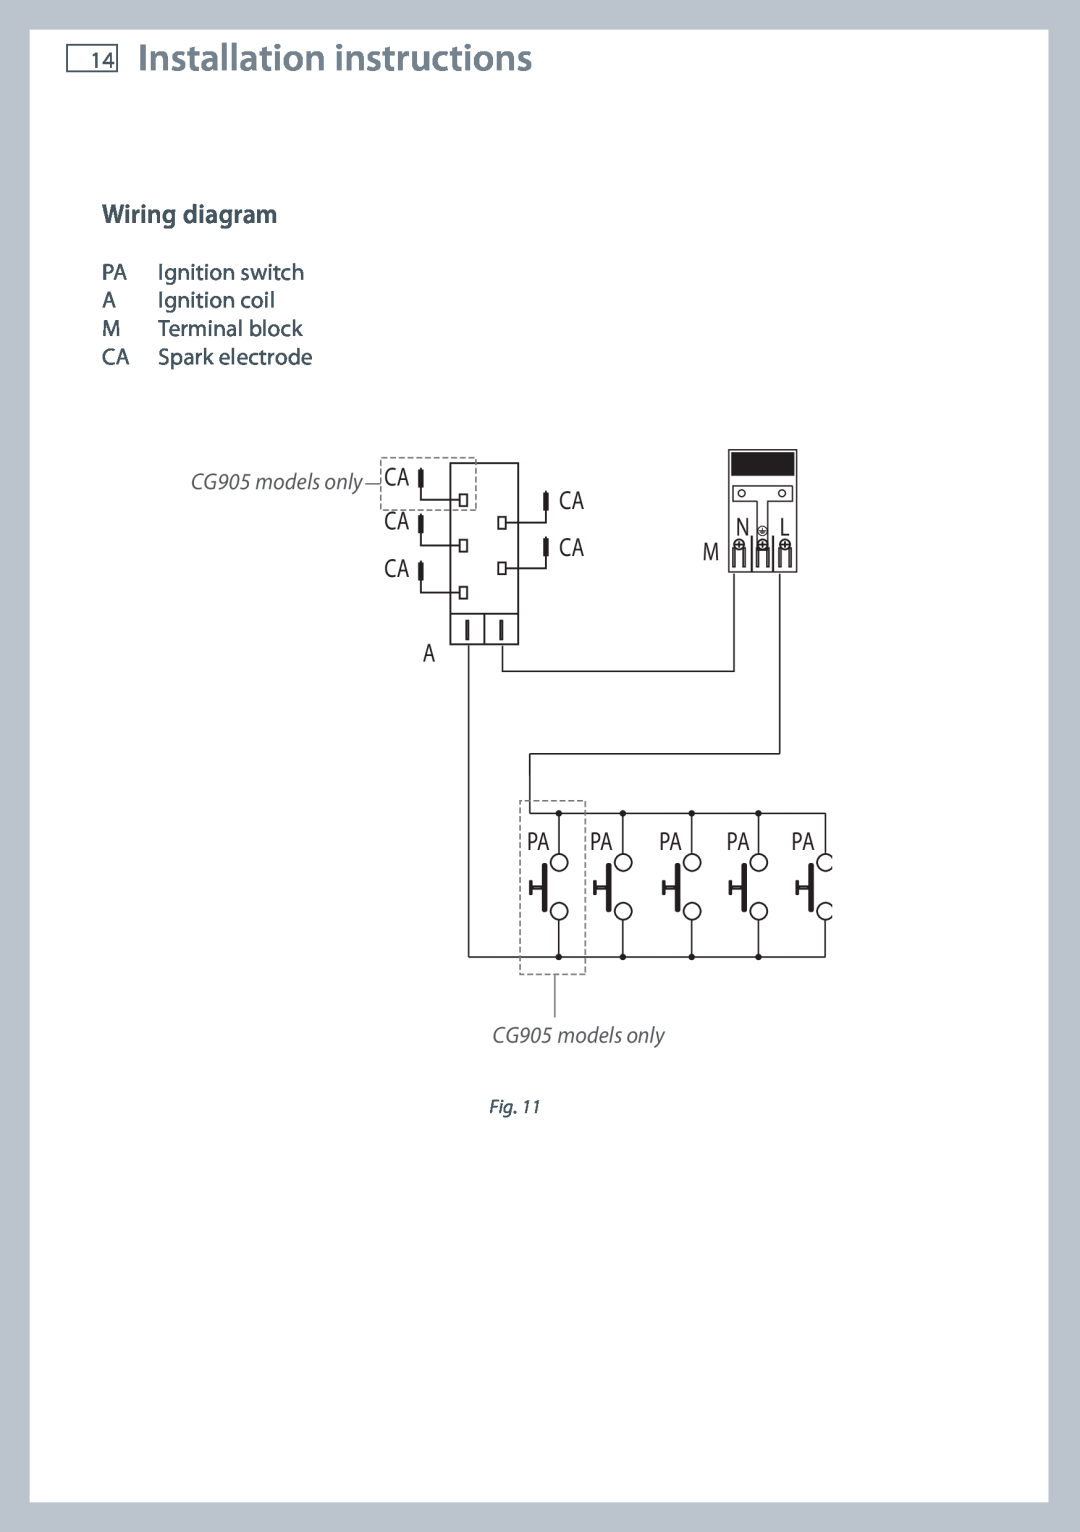 Fisher & Paykel CG604 Wiring diagram, Installation instructions, Ca Ca A, Ca Ca M, Pa Pa, CG905 models only CA 